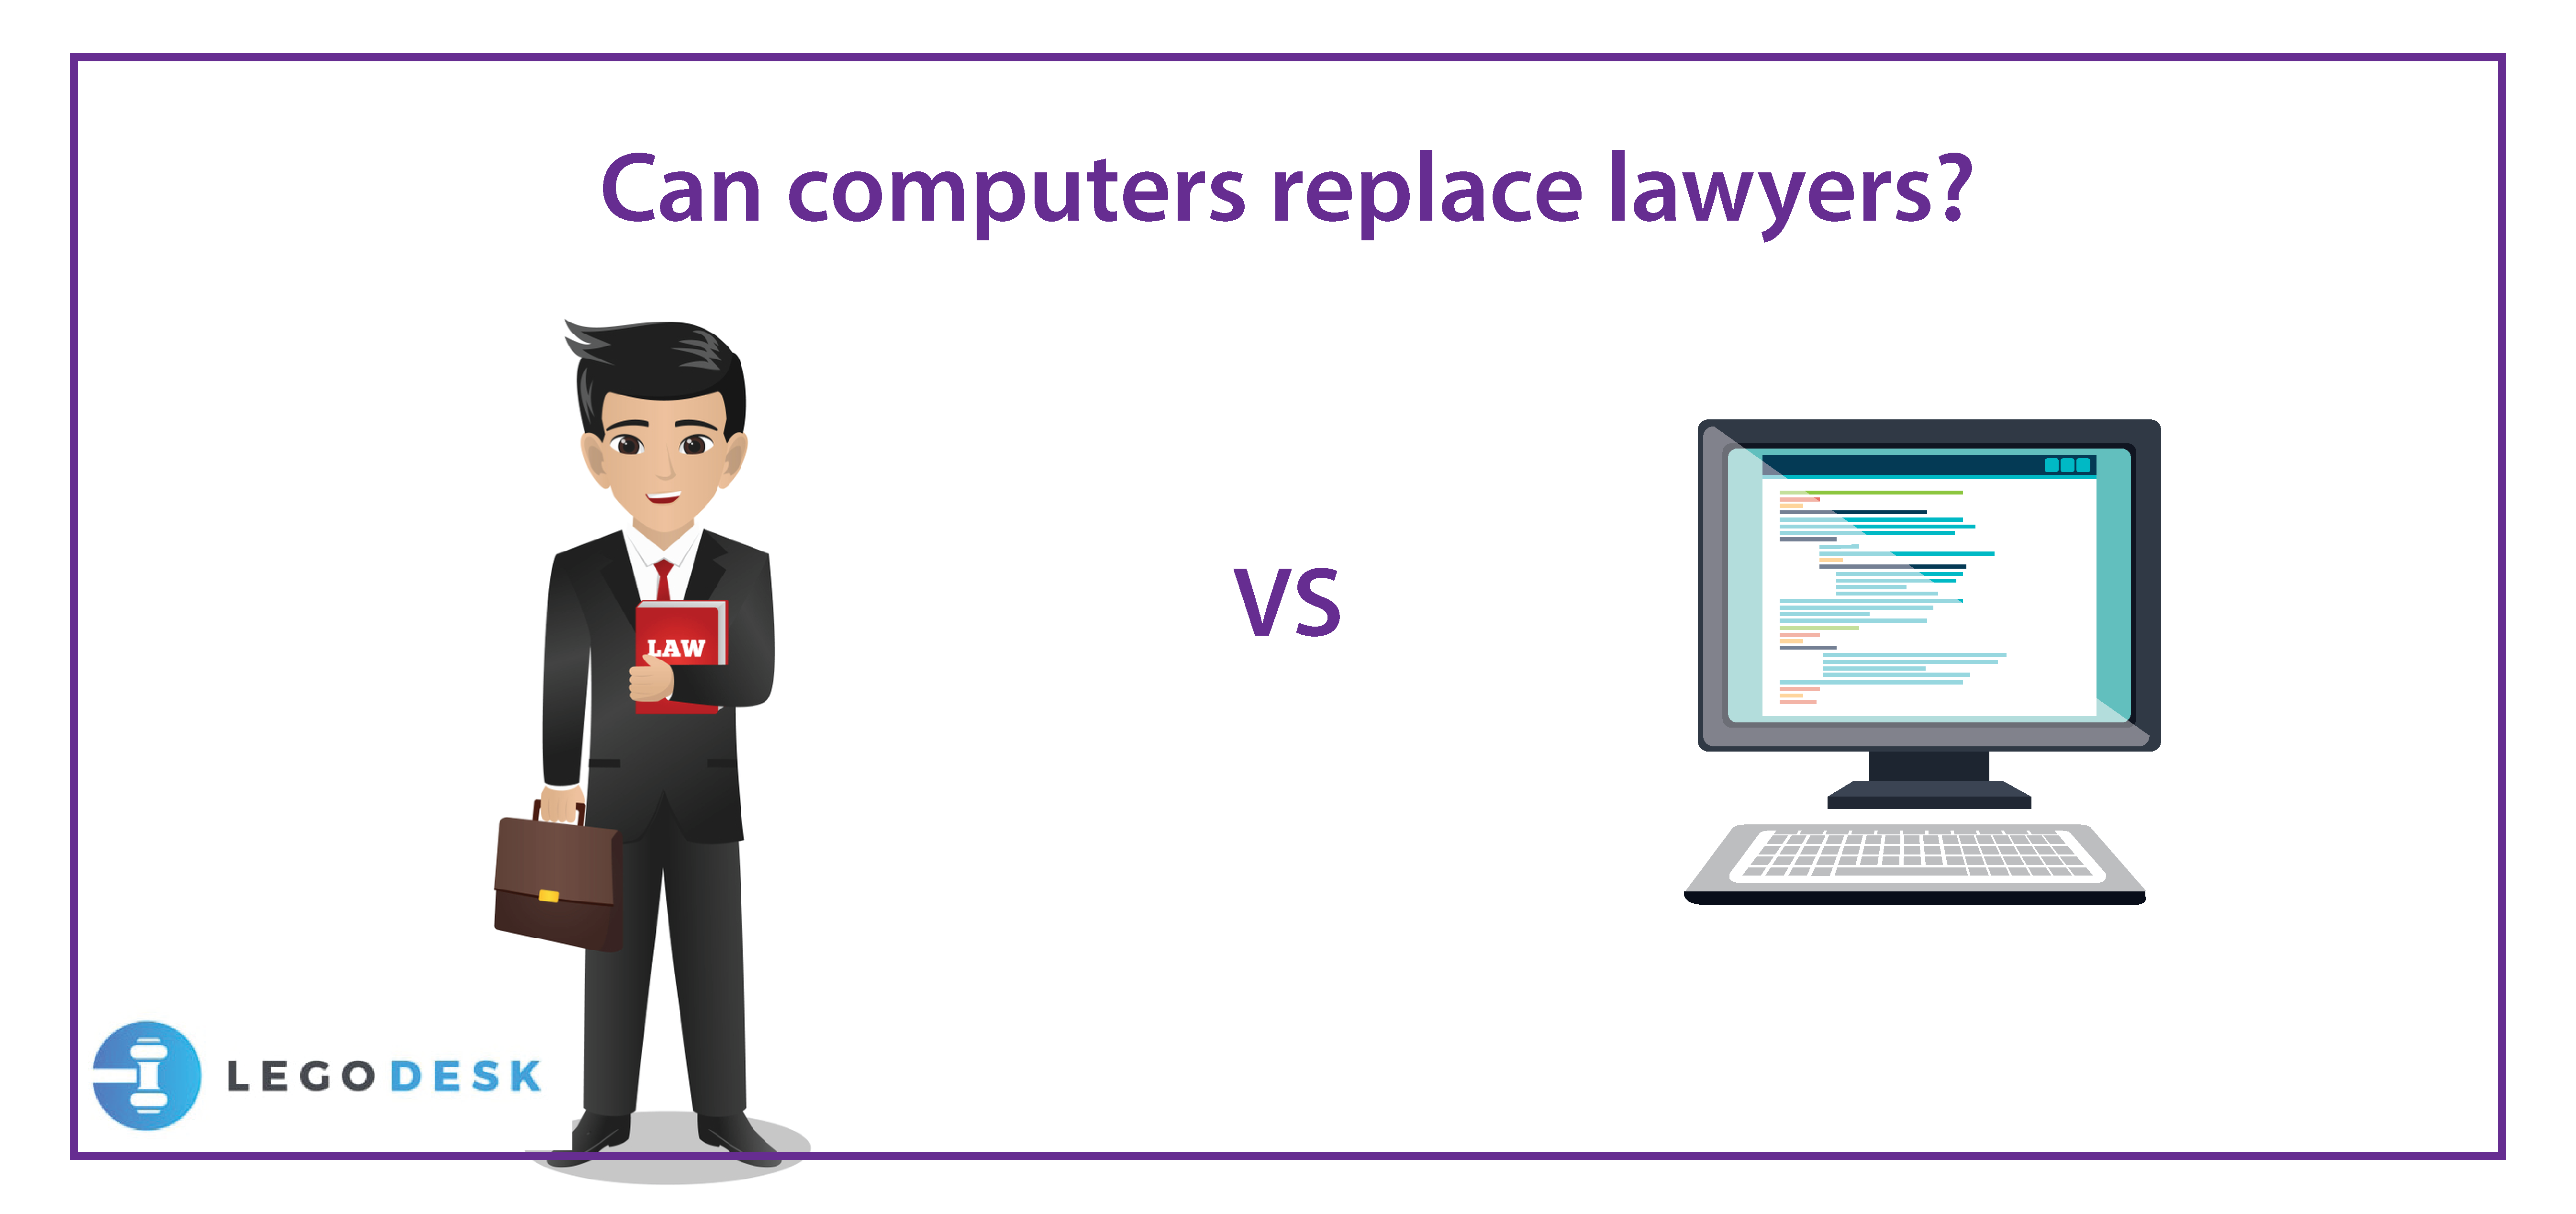 Can computers replace lawyers?